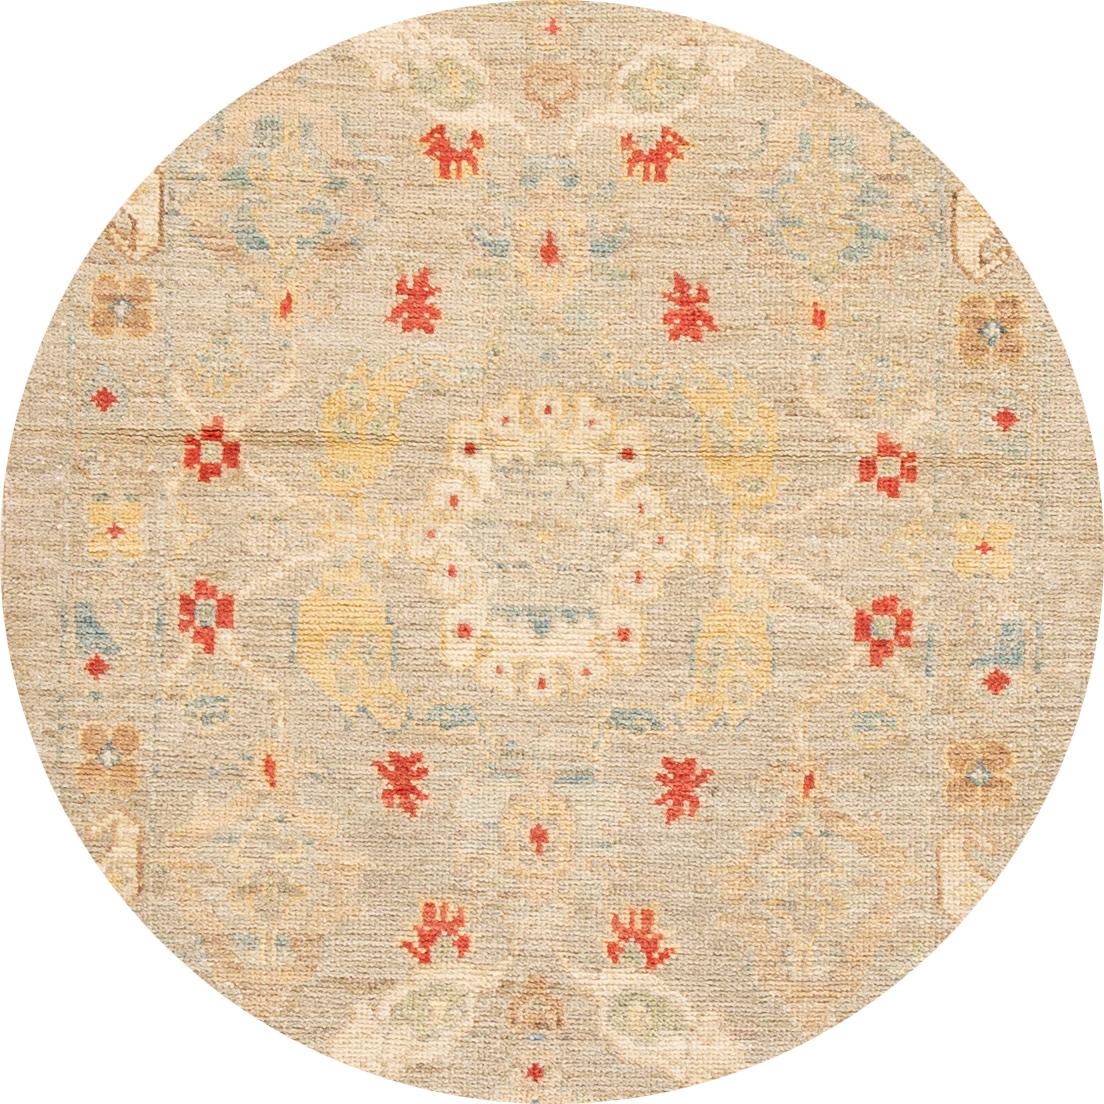 Beautiful contemporary Sultanabad runner rug, hand knotted wool with an tan field, red, blue and ivory accents all-over the design.
This rug measures 3' 1